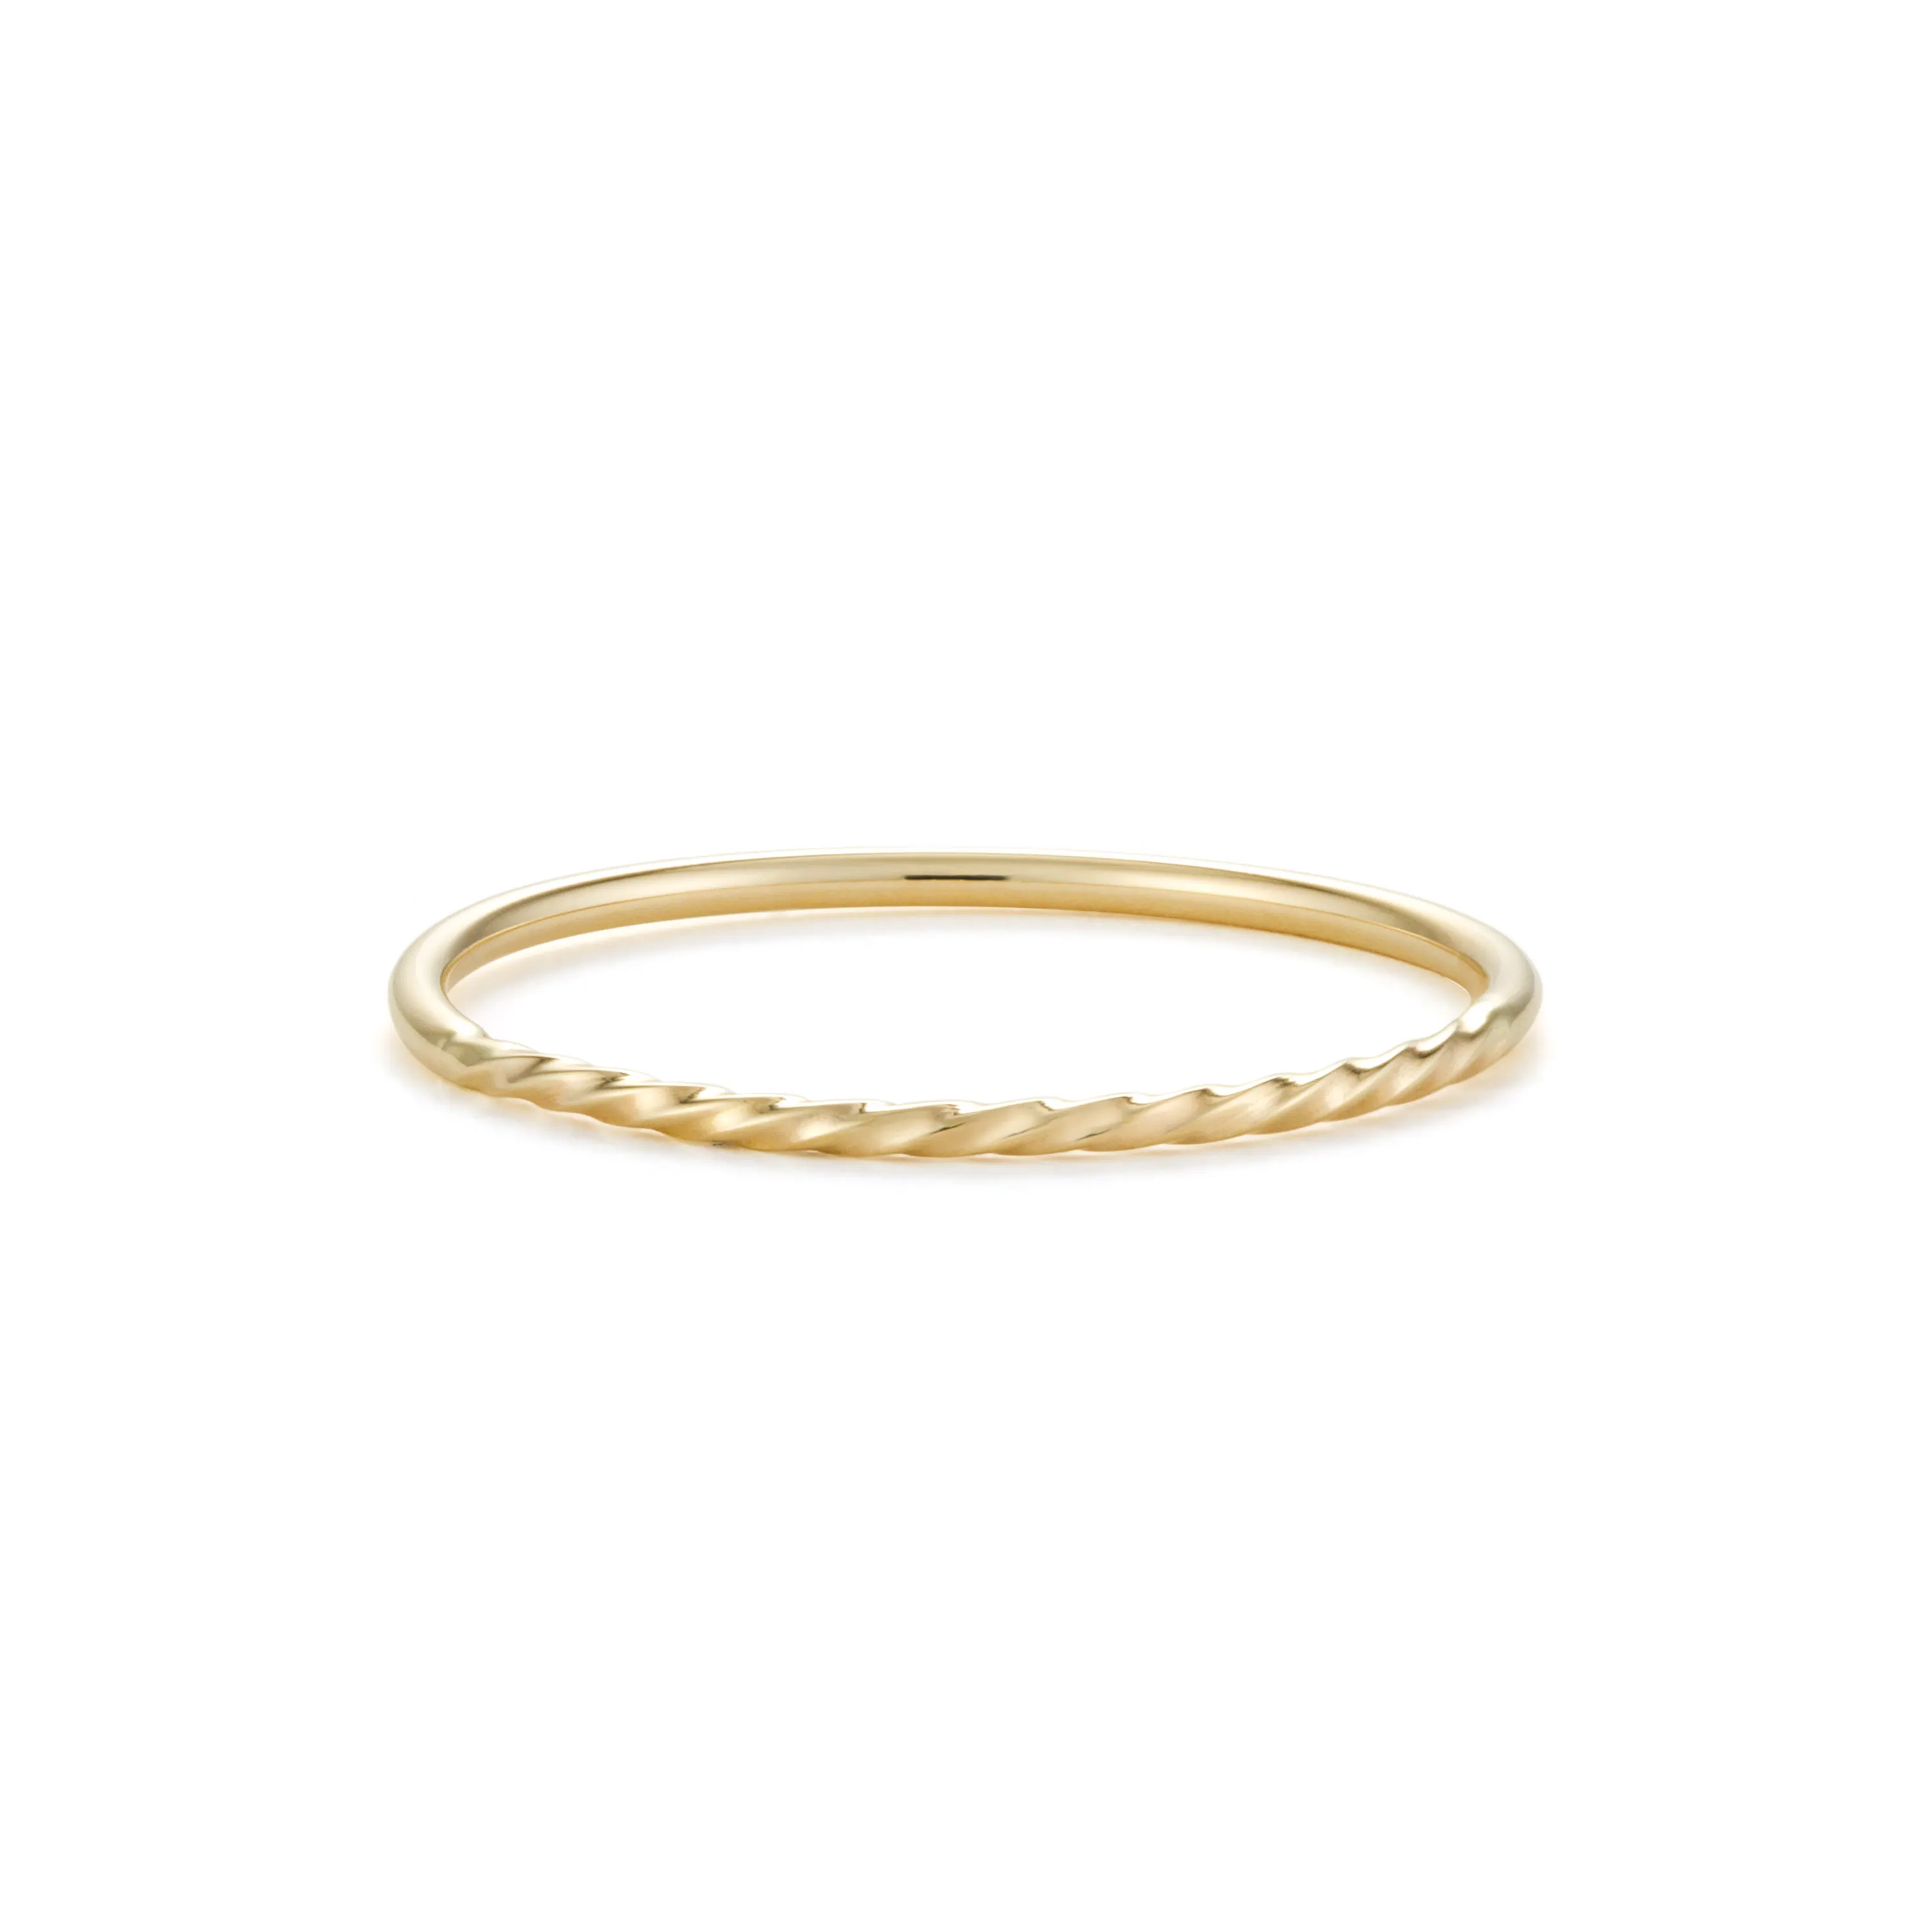 Simple Fashion Yellow Gold Color Ring Jewelry For Women Gift 14K Solid Gold Ring